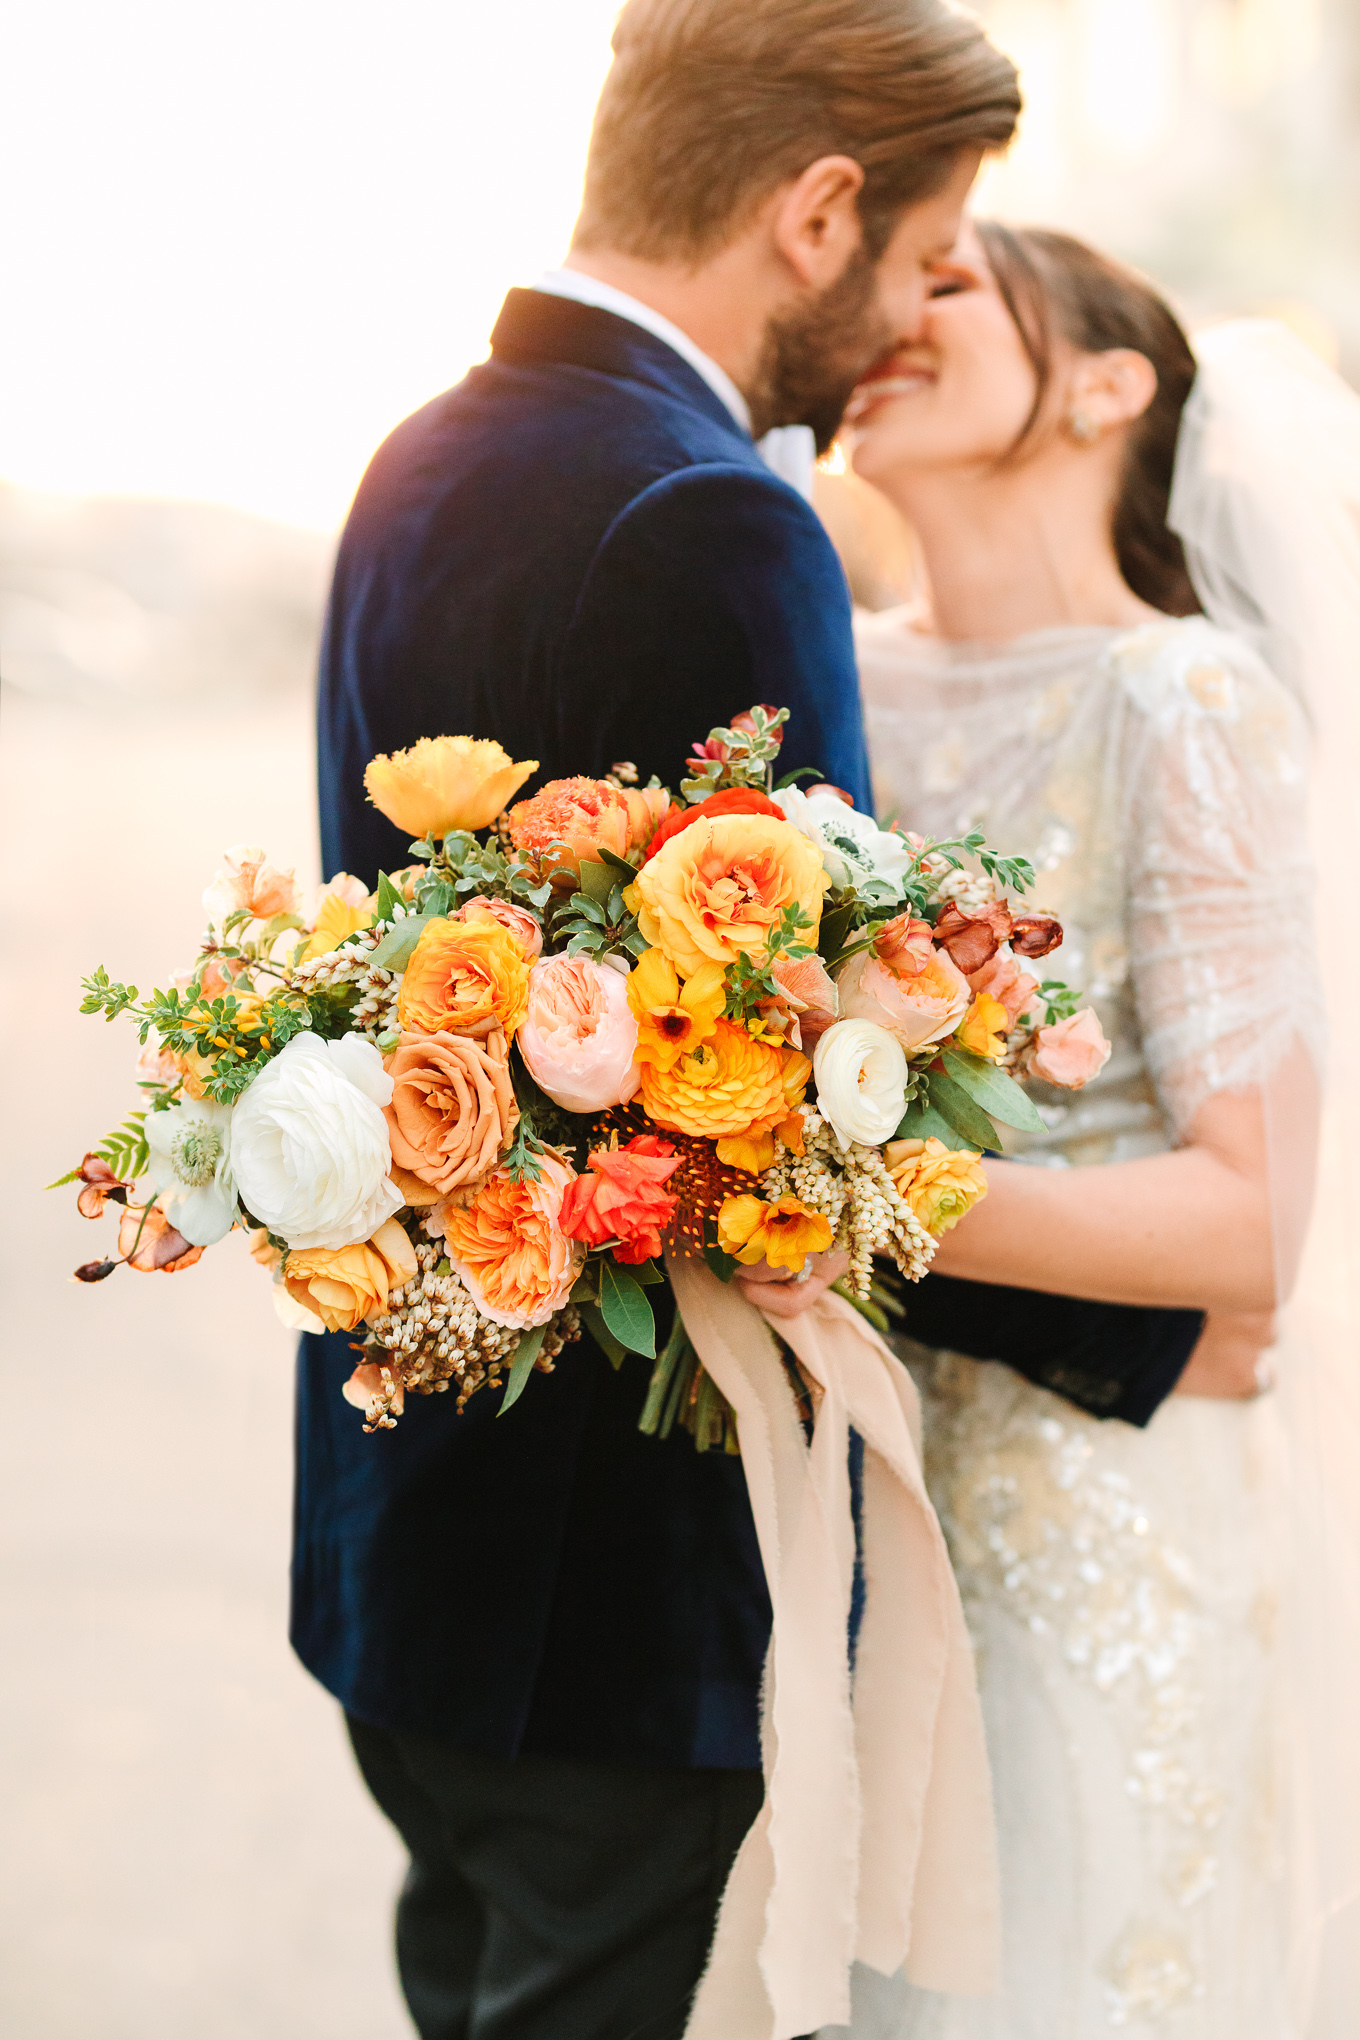 Orange and yellow wedding flowers | Beautiful bridal bouquet inspiration and advice | Colorful and elevated wedding photography for fun-loving couples in Southern California | #weddingflowers #weddingbouquet #bridebouquet #bouquetideas #uniquebouquet   Source: Mary Costa Photography | Los Angeles